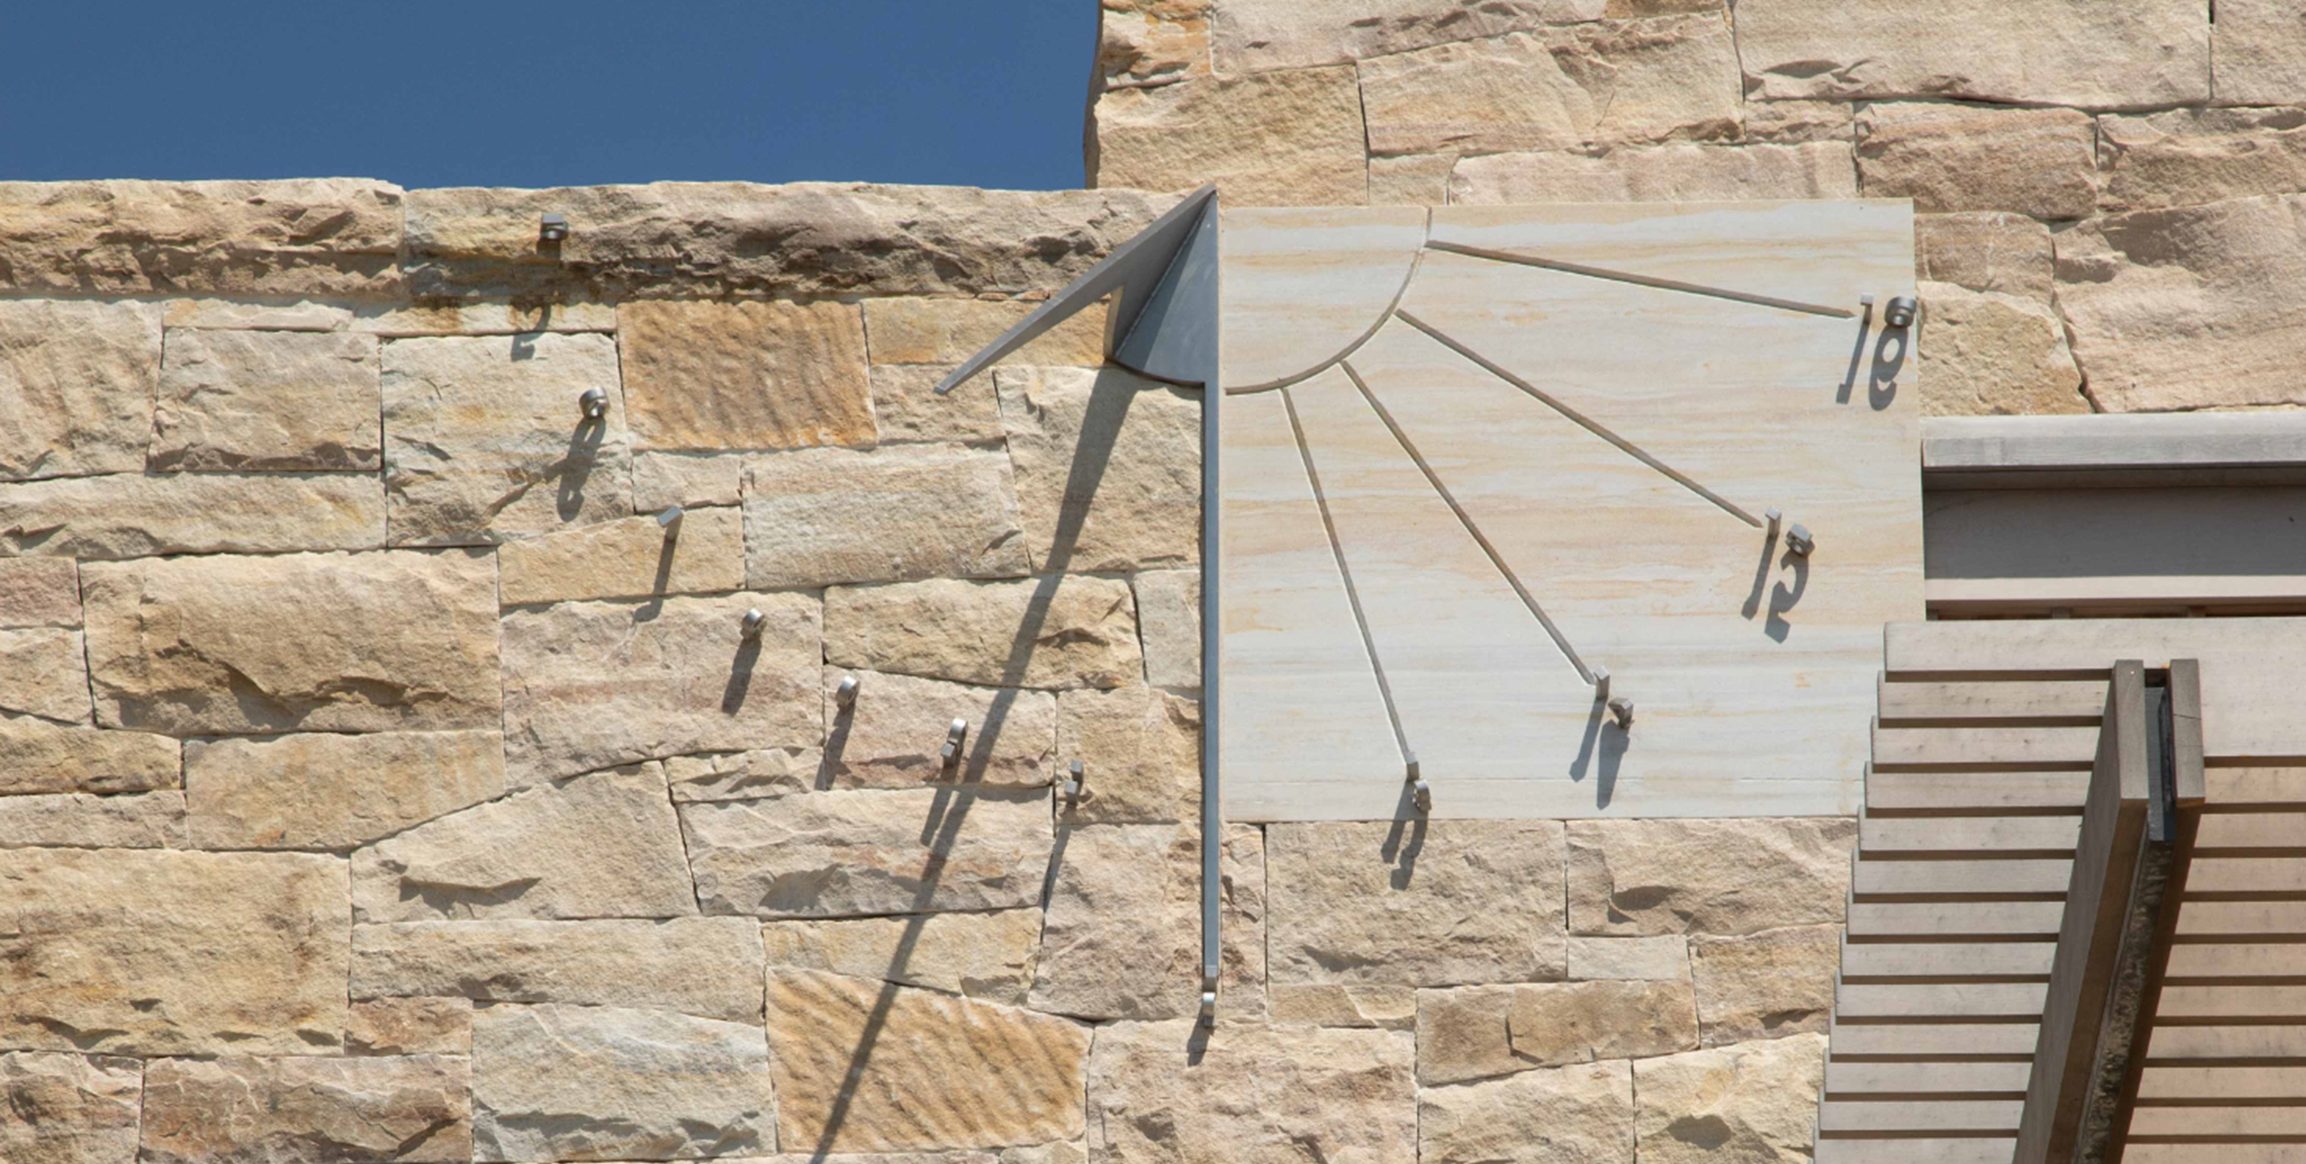 Image of sundial on stone wall.